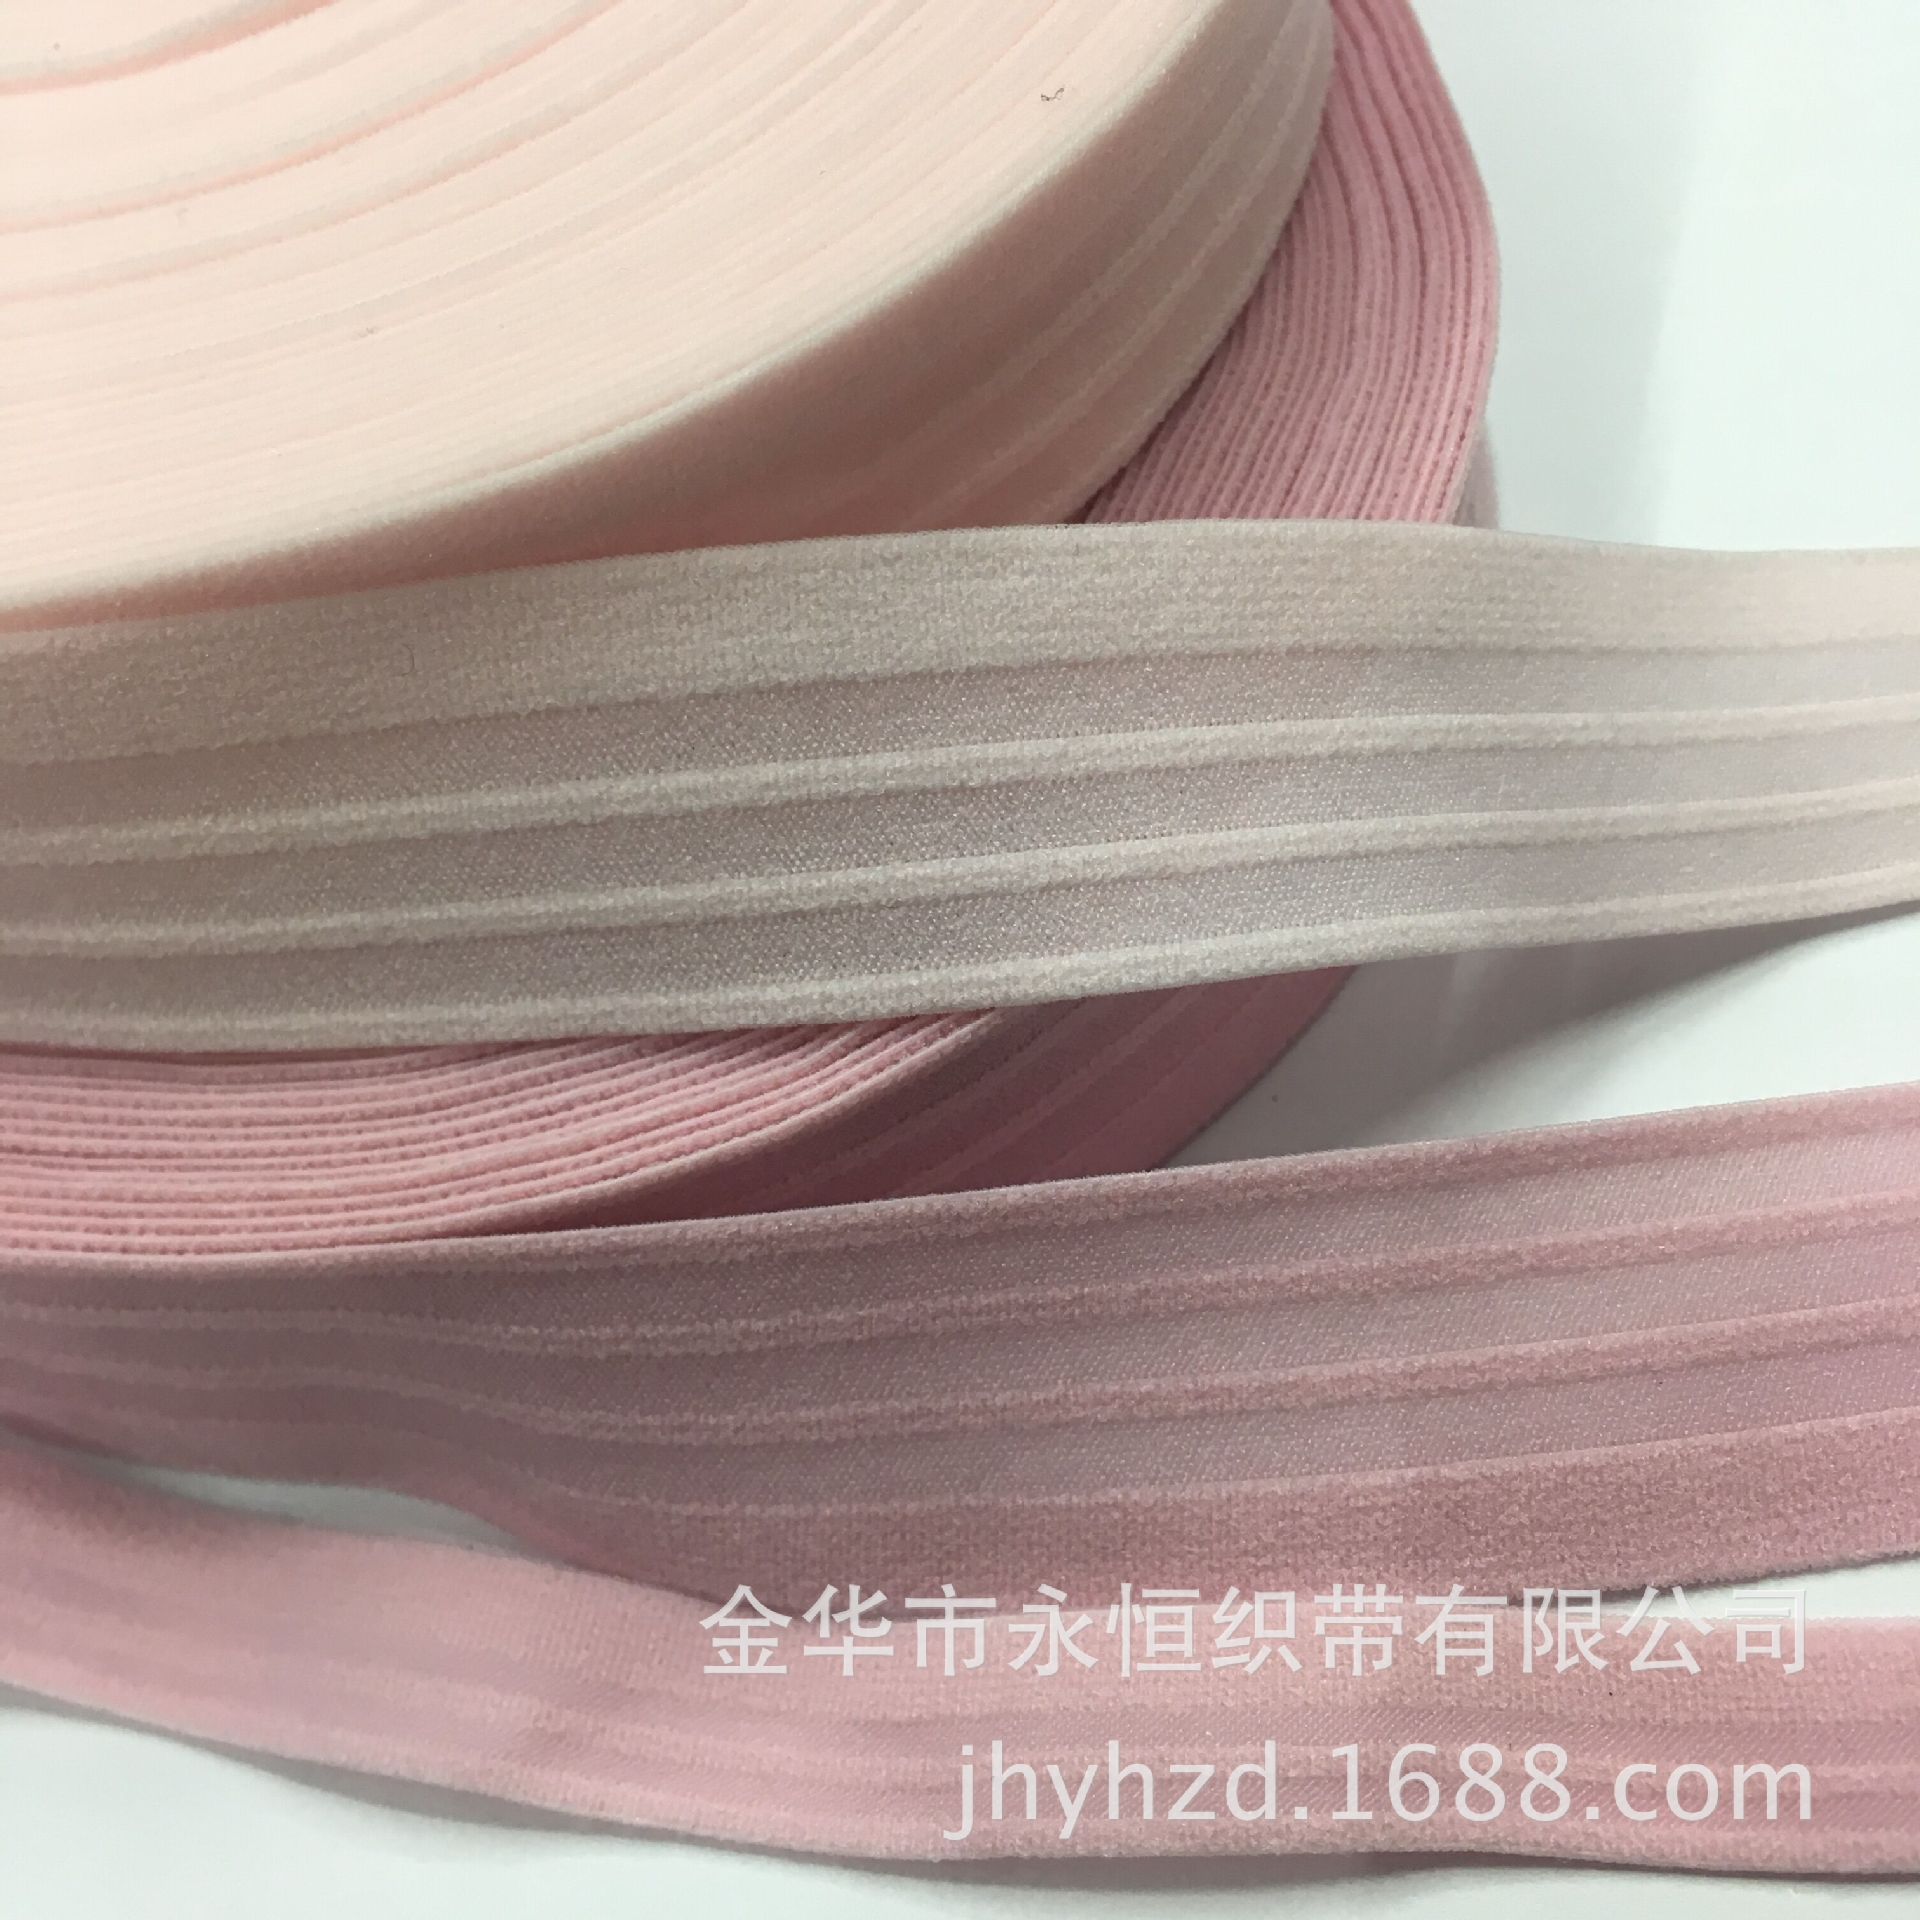 High Quality Boud Edage Belt Elastic Band Underwear Panties Trim Piping Tape Fishing Line Trim Can Be Dyed